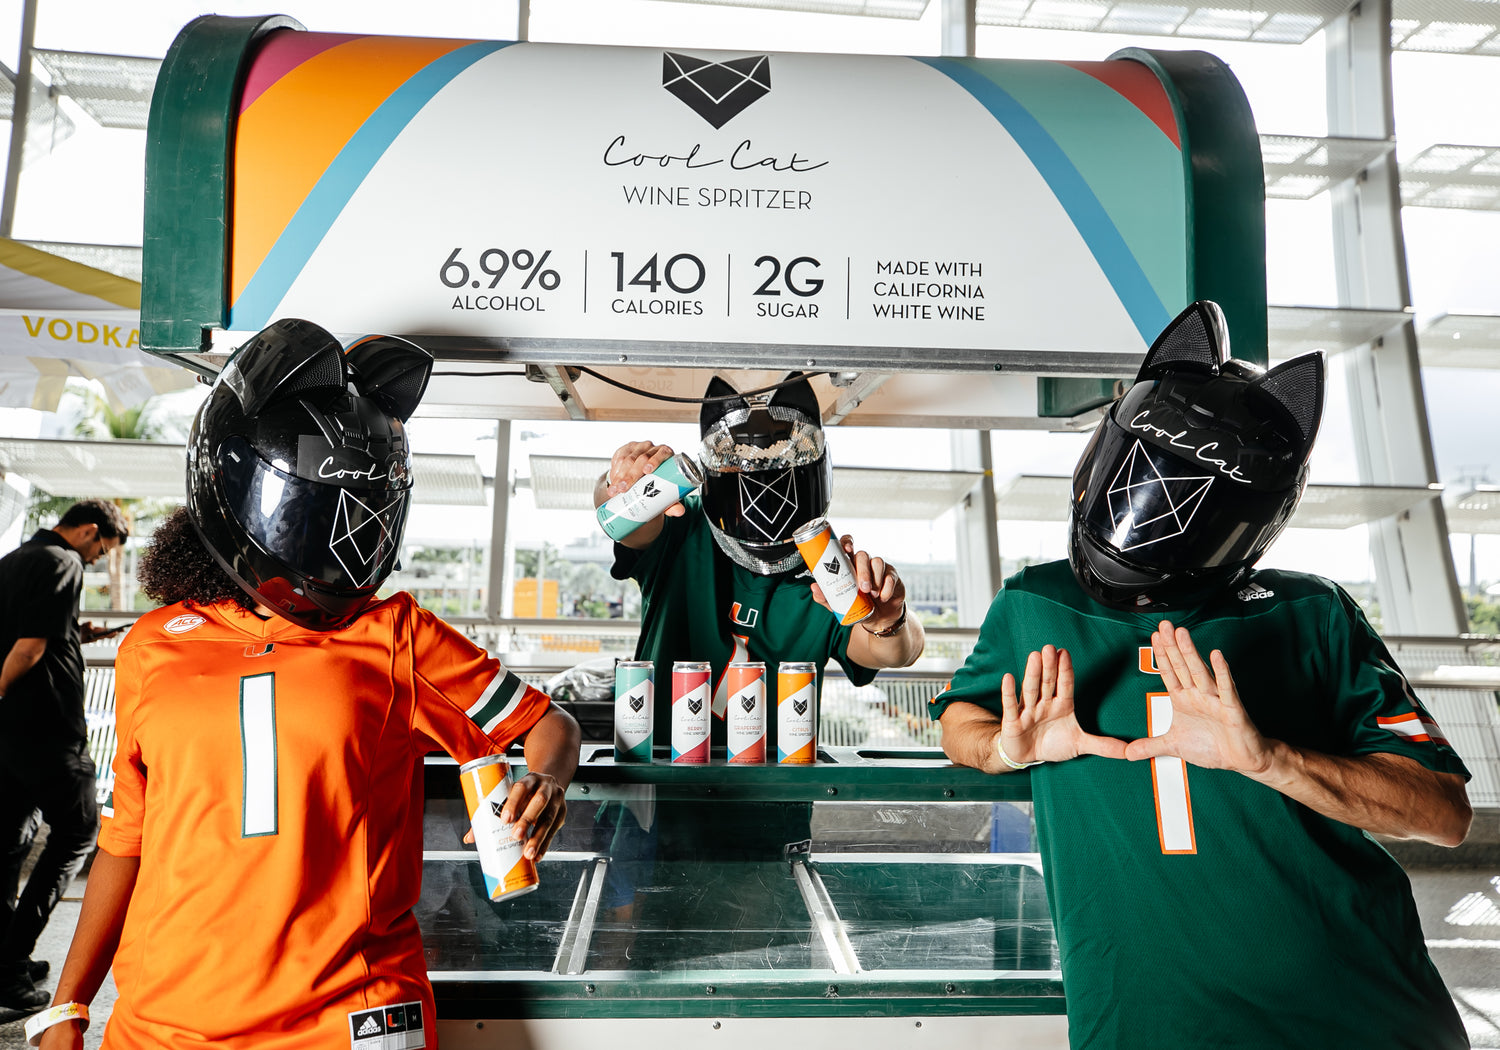 The Cool Cat Wine Spritzer stand at the University of Miami Hurricanes Stadium.